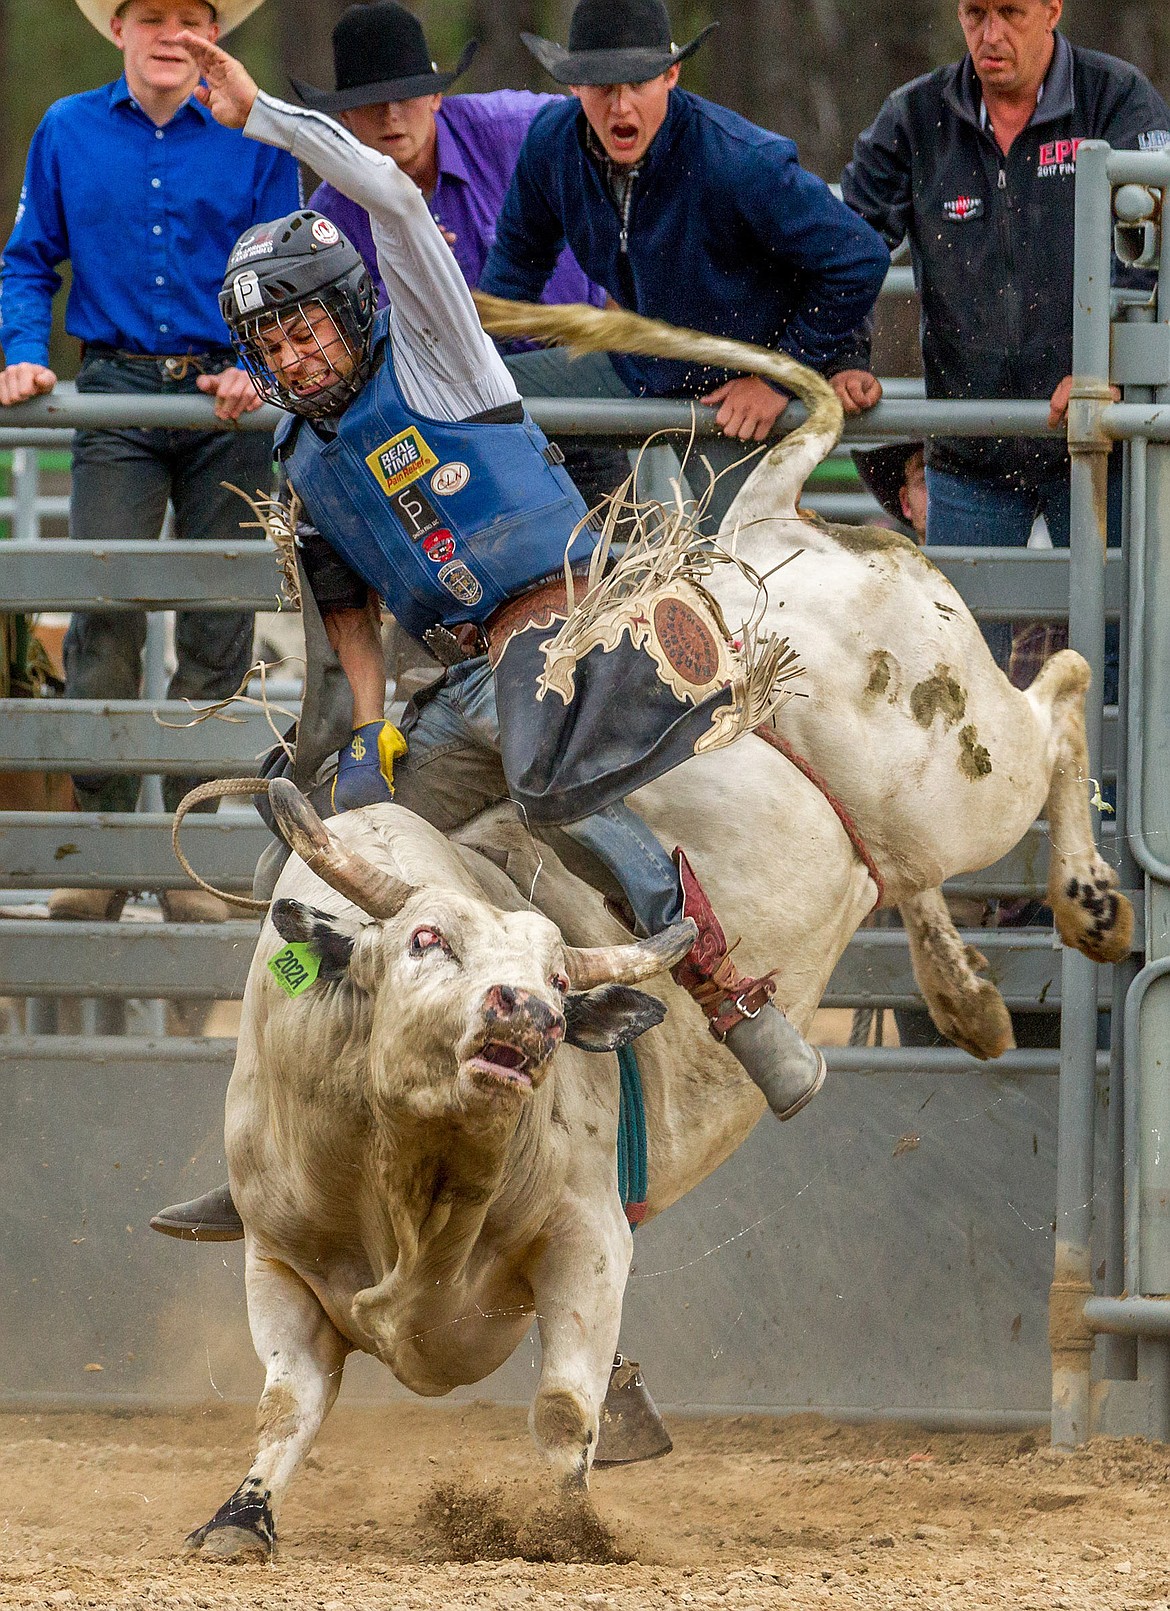 Shawn Best II of Omak, Washington, competes in the Incredi-Bull bull riding event at J. Neils Park in Libby on Saturday, June 9, 2018. (John Blodgett/The Western News)